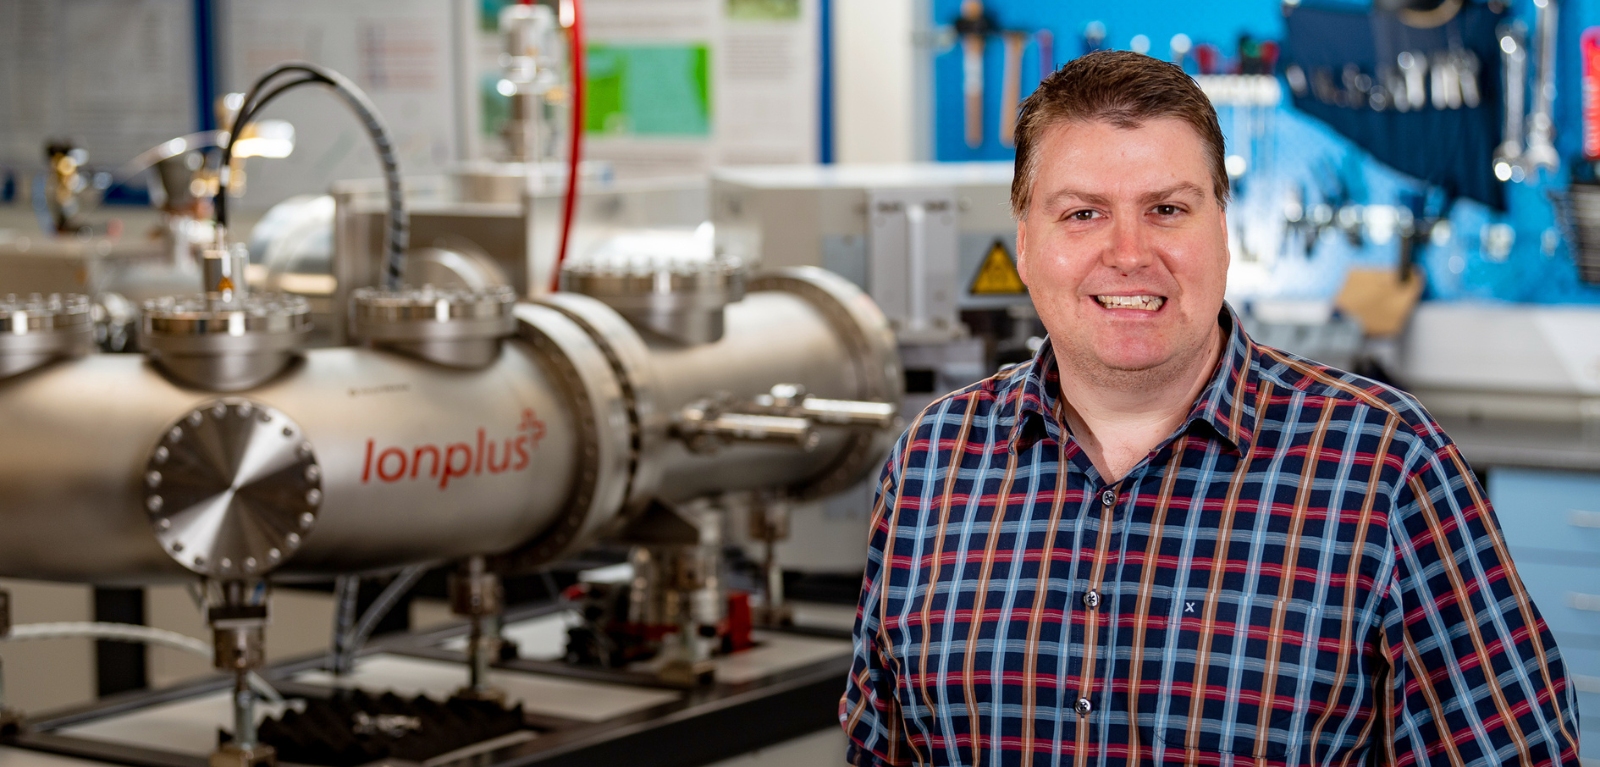 Professor Graeme Swindles standing the radiocarbon accelerator in the 14CHRONO lab at Queen's University Belfast